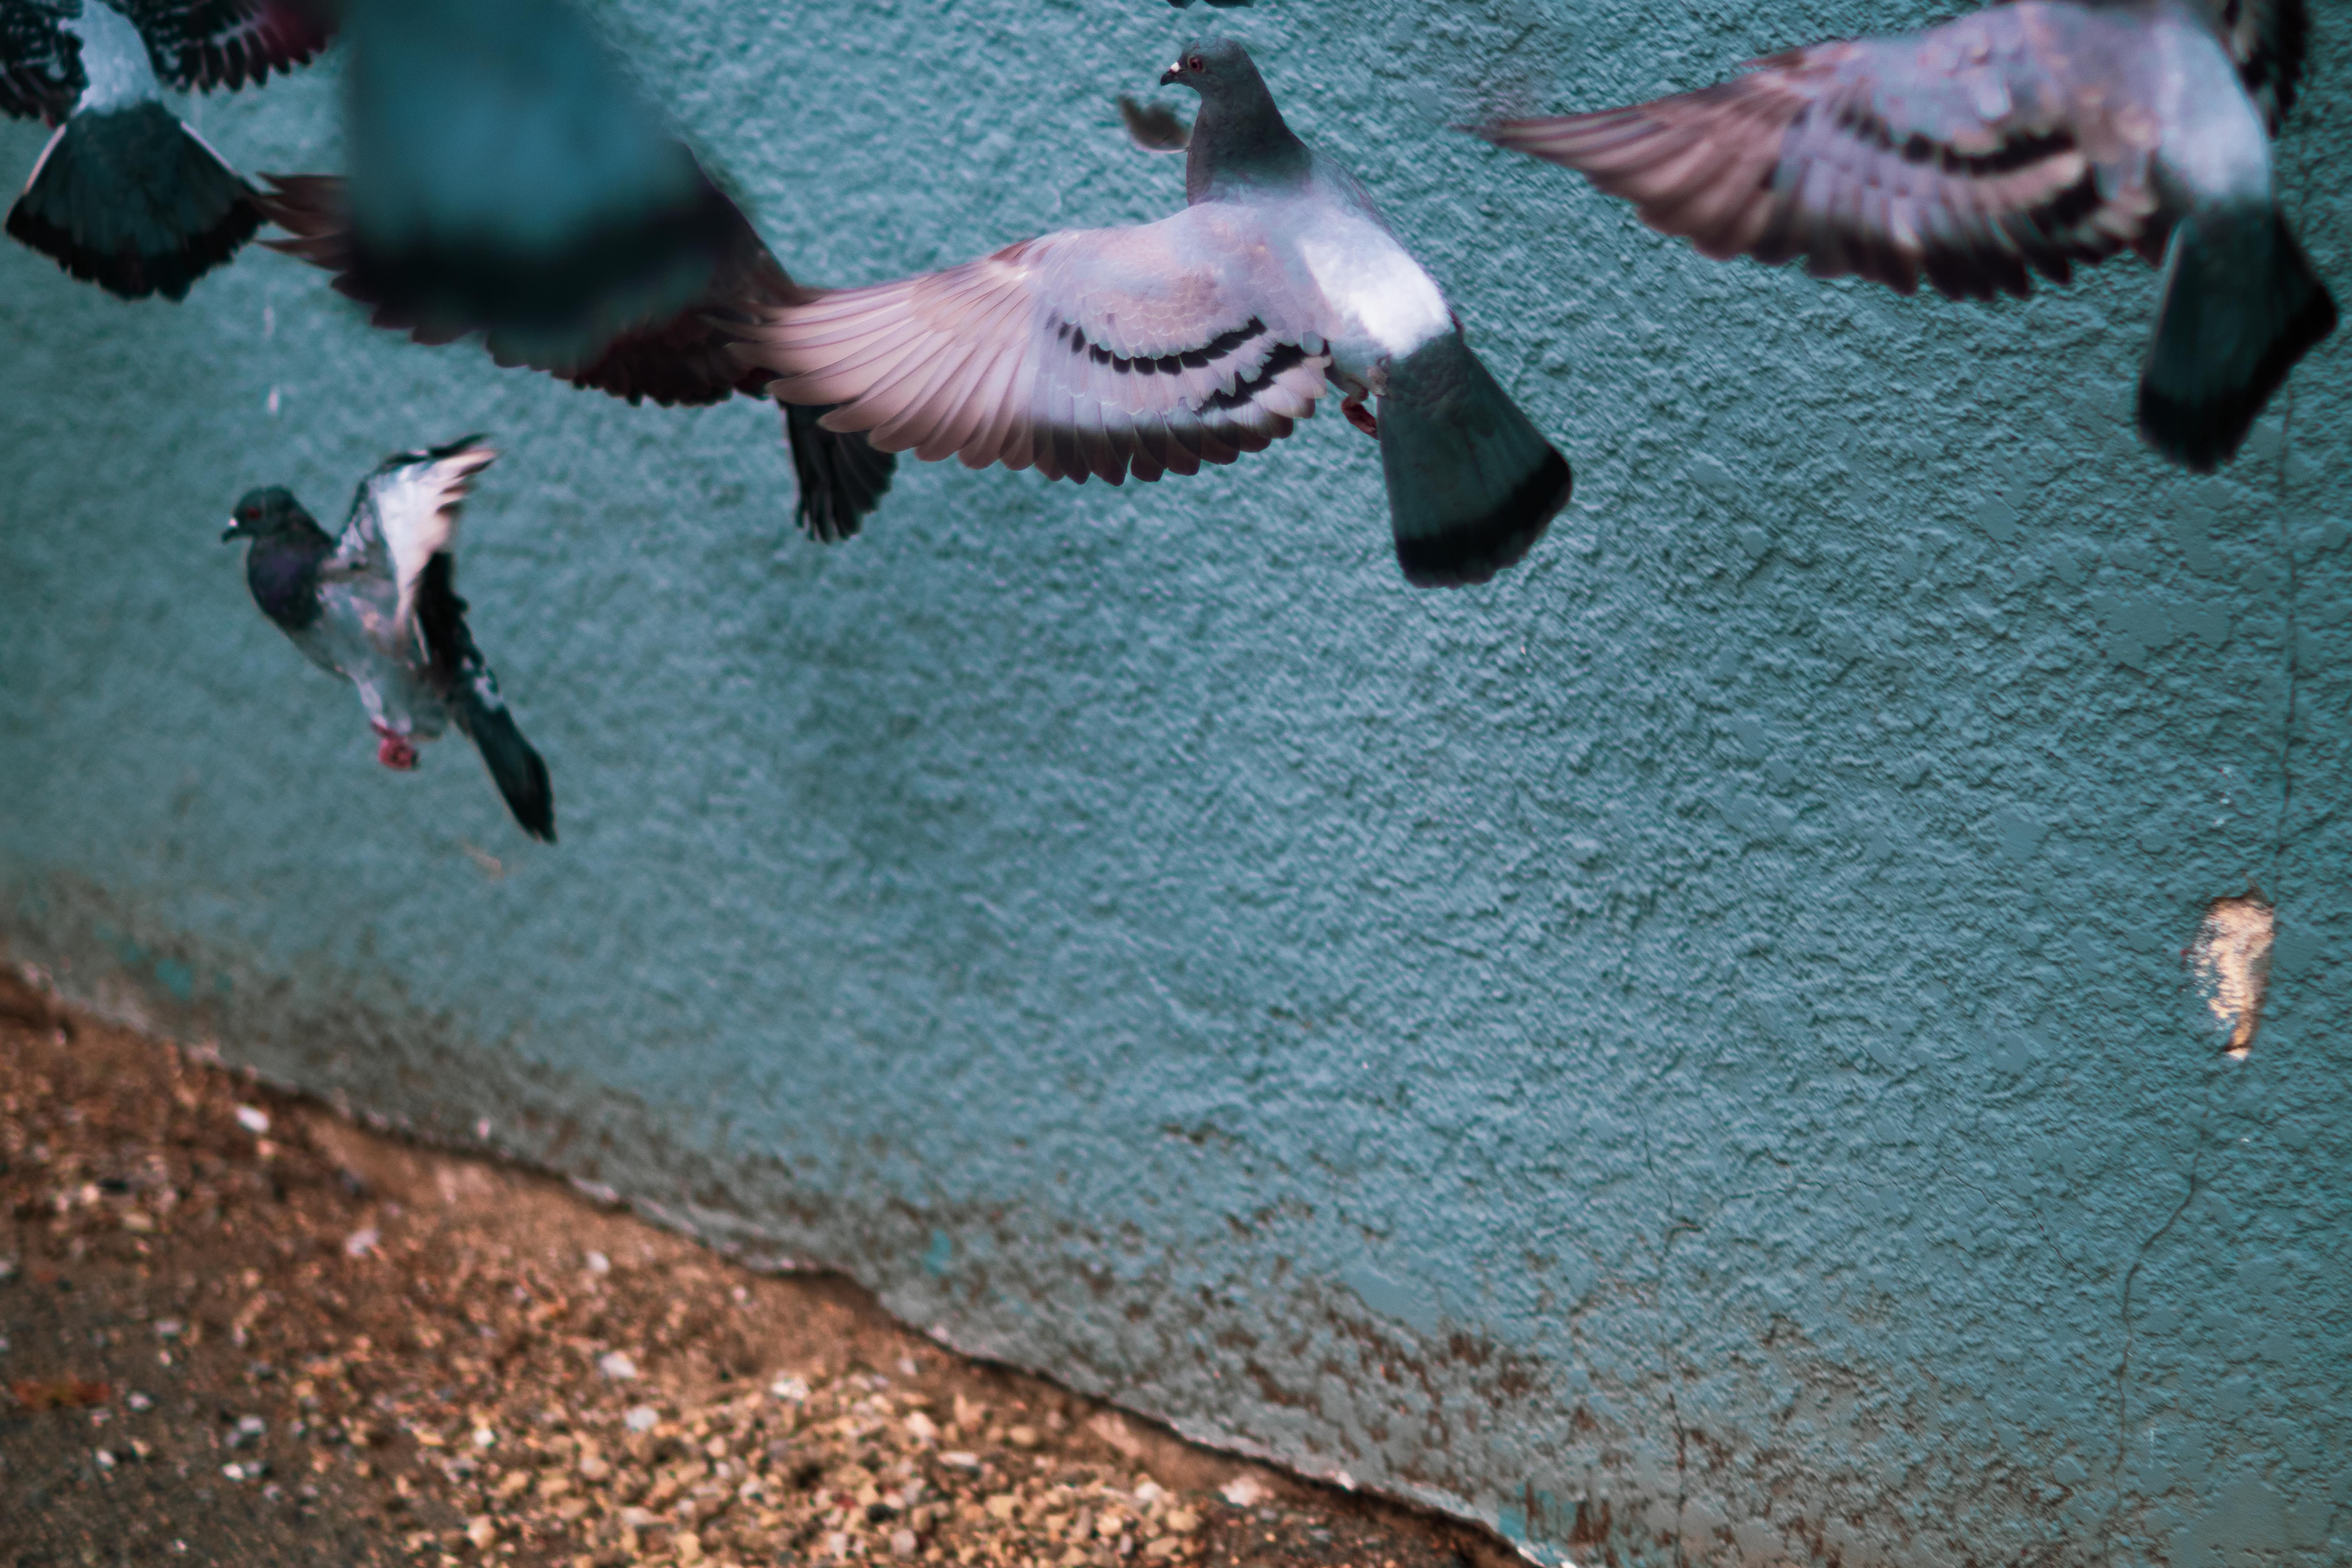 A photo of a group of pigeons talking flight in front of a teal stucco wall.